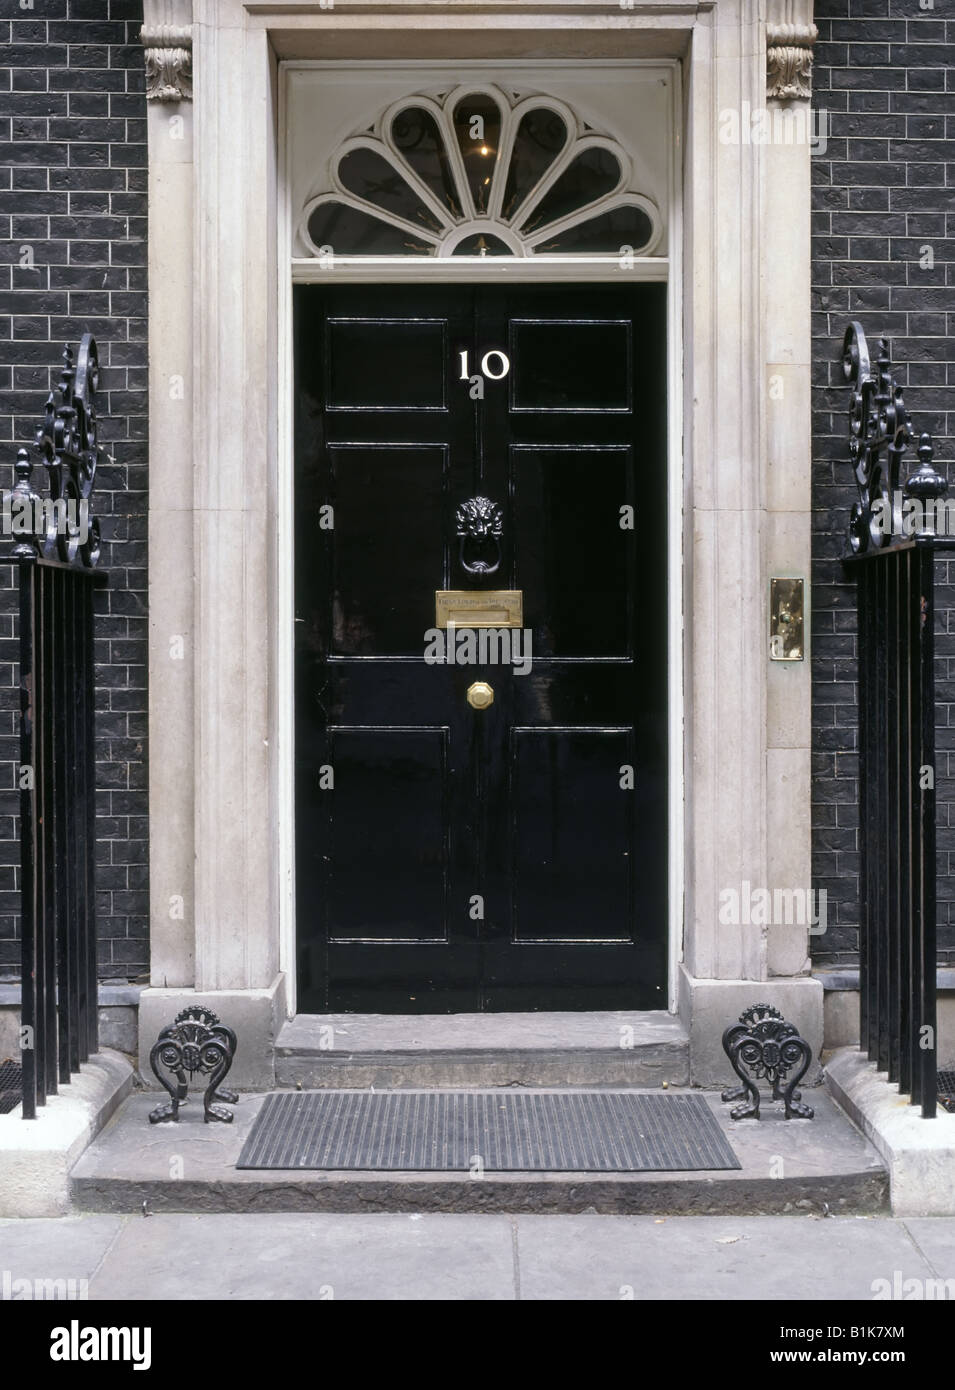 10 Downing Street front door to the official residence of the Prime Minister Westminster London England UK Stock Photo